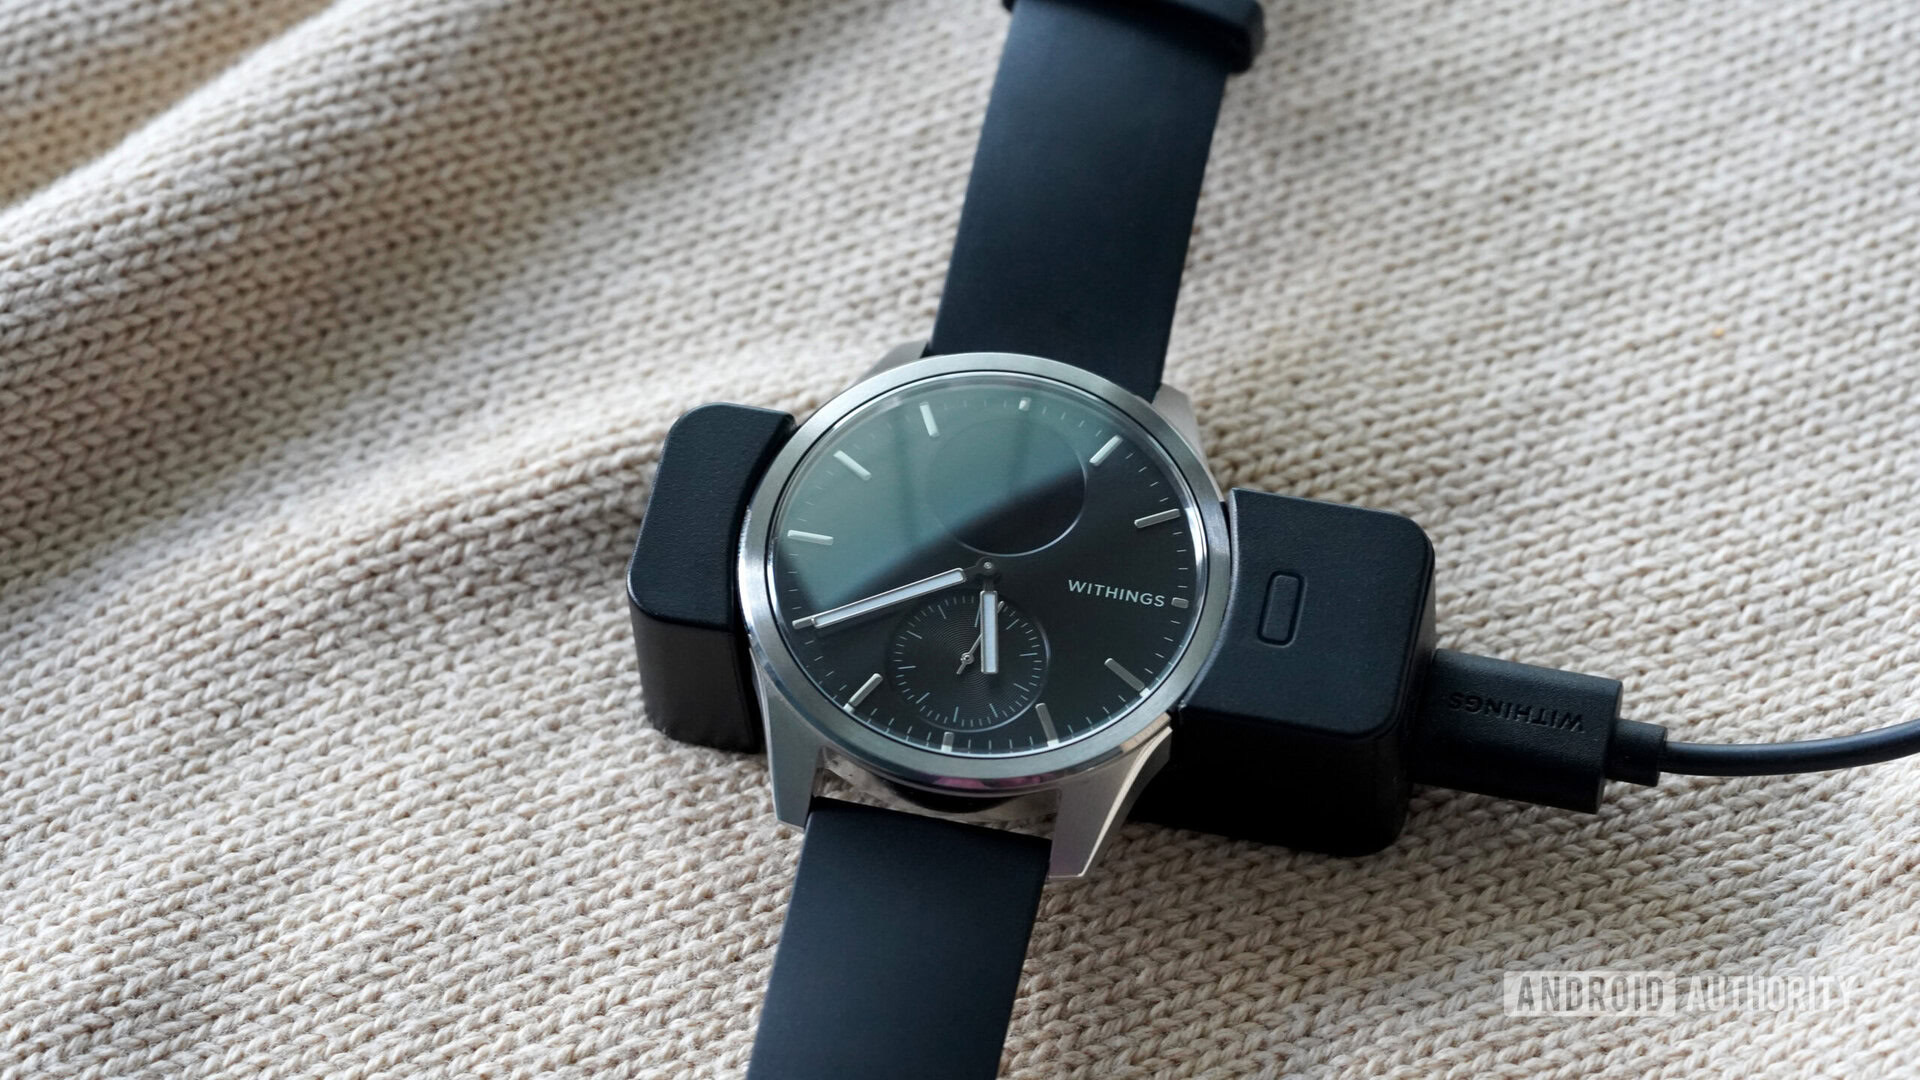 The Withings ScanWatch 2 must be properly aligned on its proprietary charger.